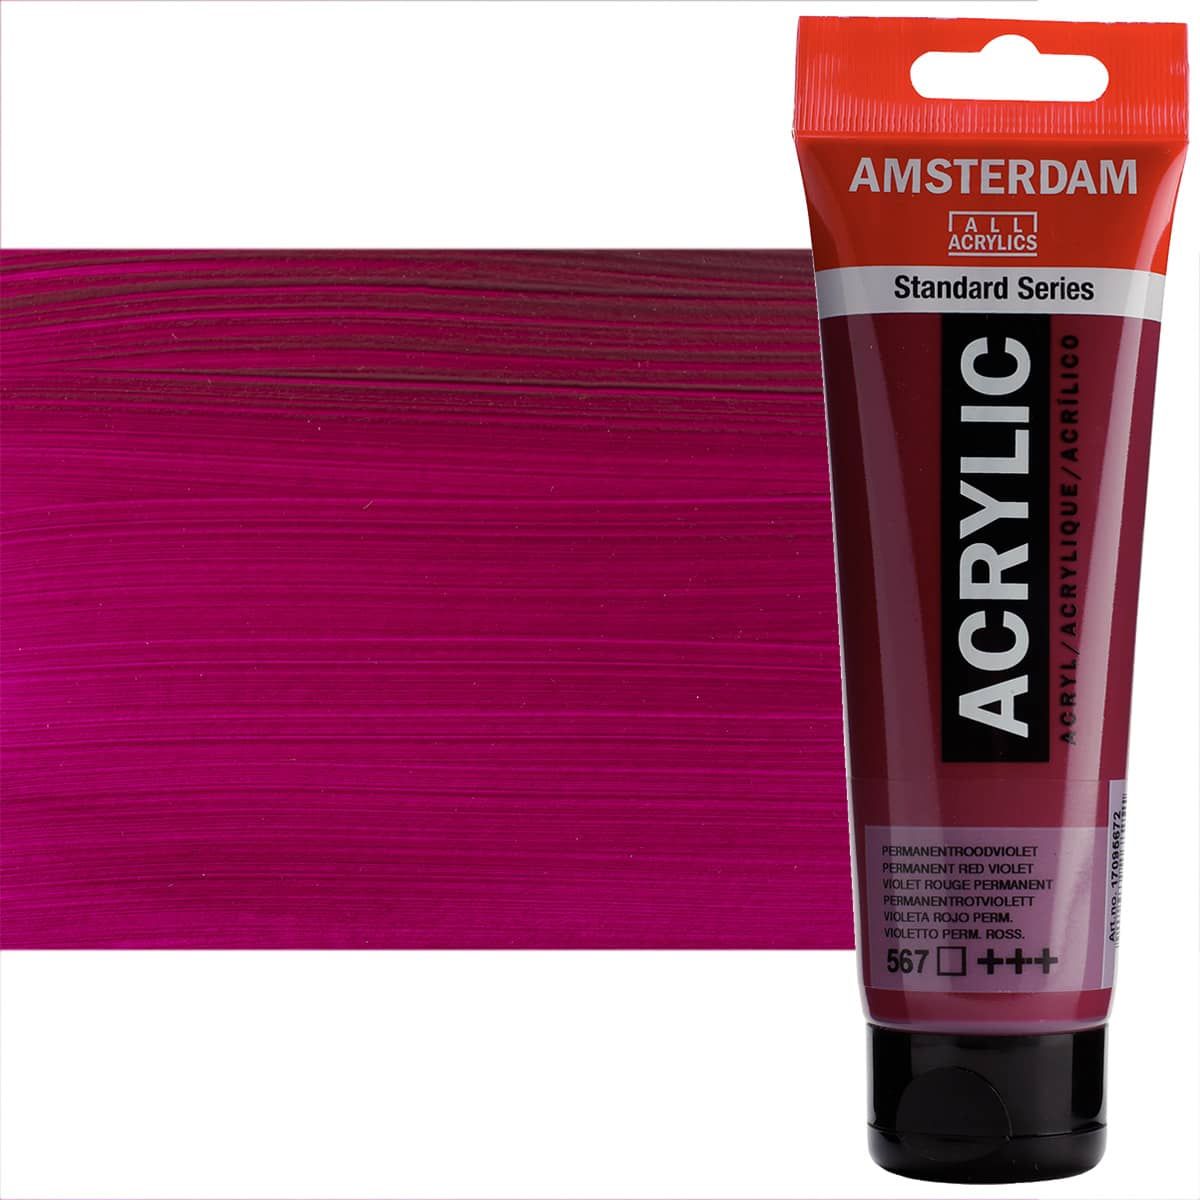 Amsterdam Standard Series Acrylic Paints - Permanent Red Violet, 120ml